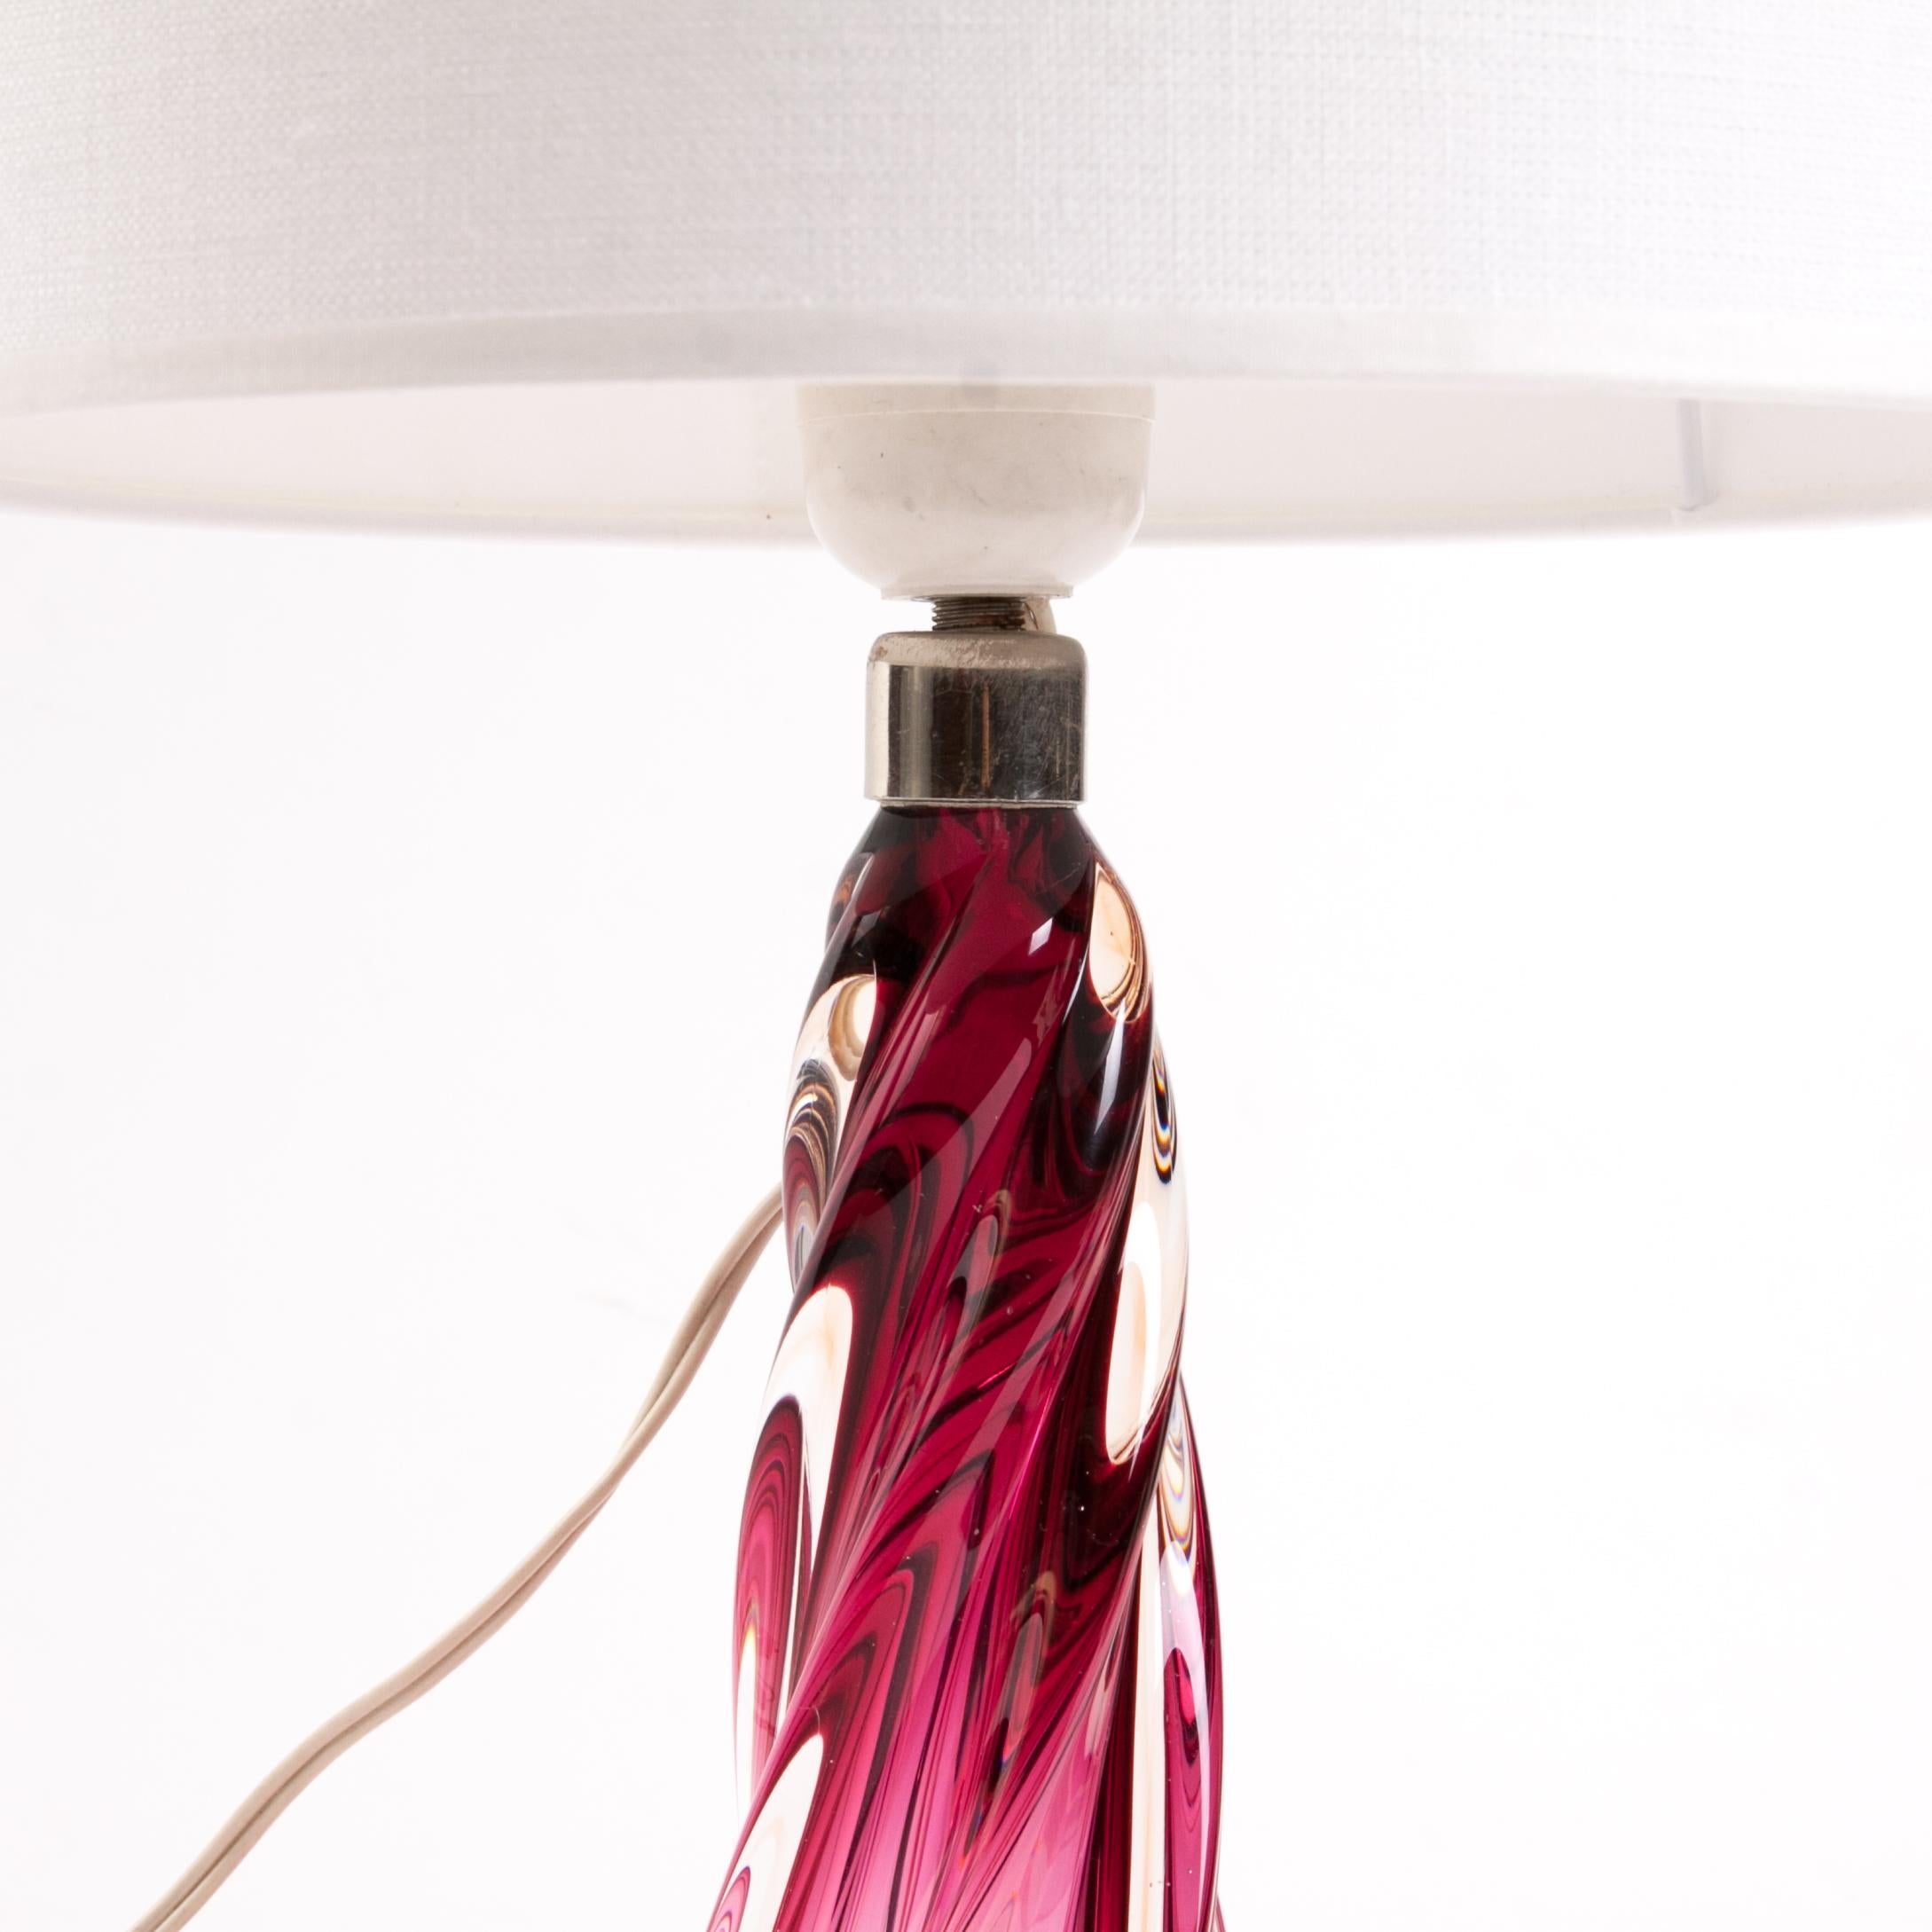 This lamp features art glass manufactured according to traditional glassworking techniques. The body, or stem of the lamp, is made of colored orange and pink glass. These colors gradually become more vivid at the base of the stem and at the top.